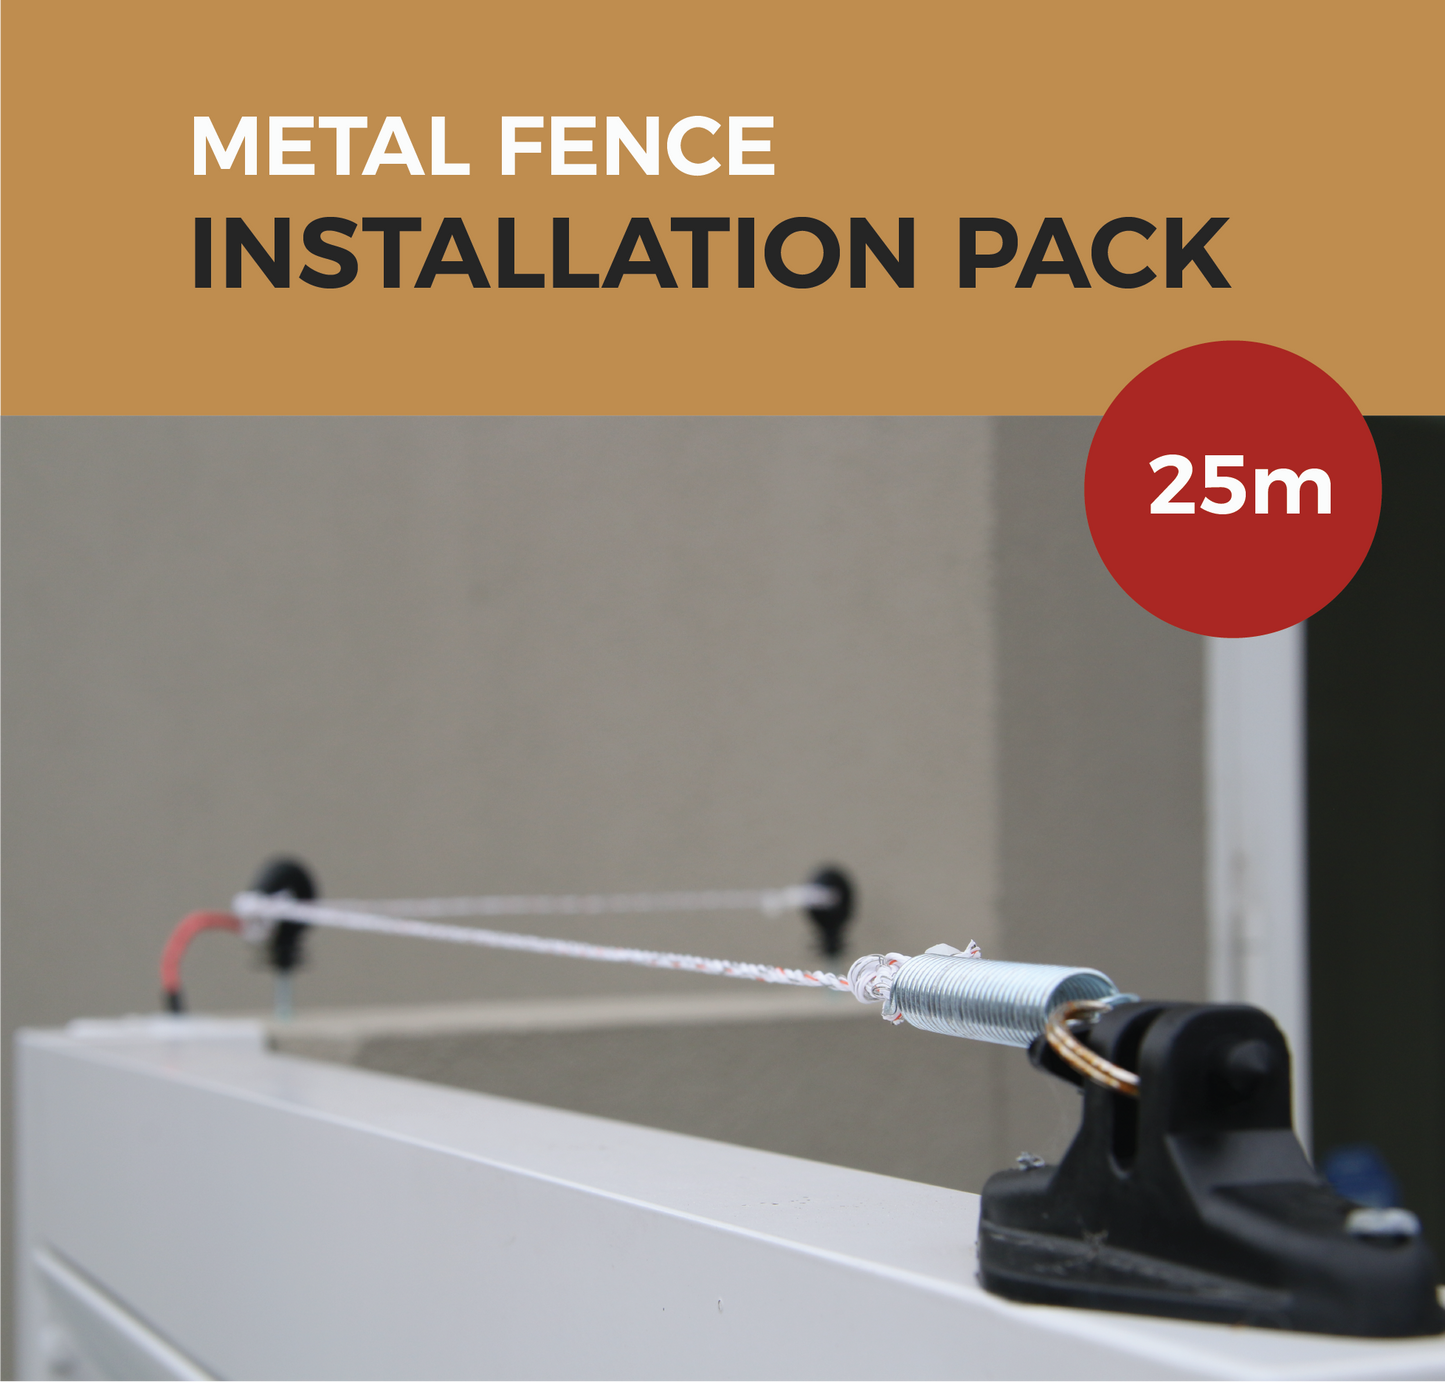 Cat Proof Fence Installation Pack - Colorbond Metal Fences 25m | SmartCatsStayHome